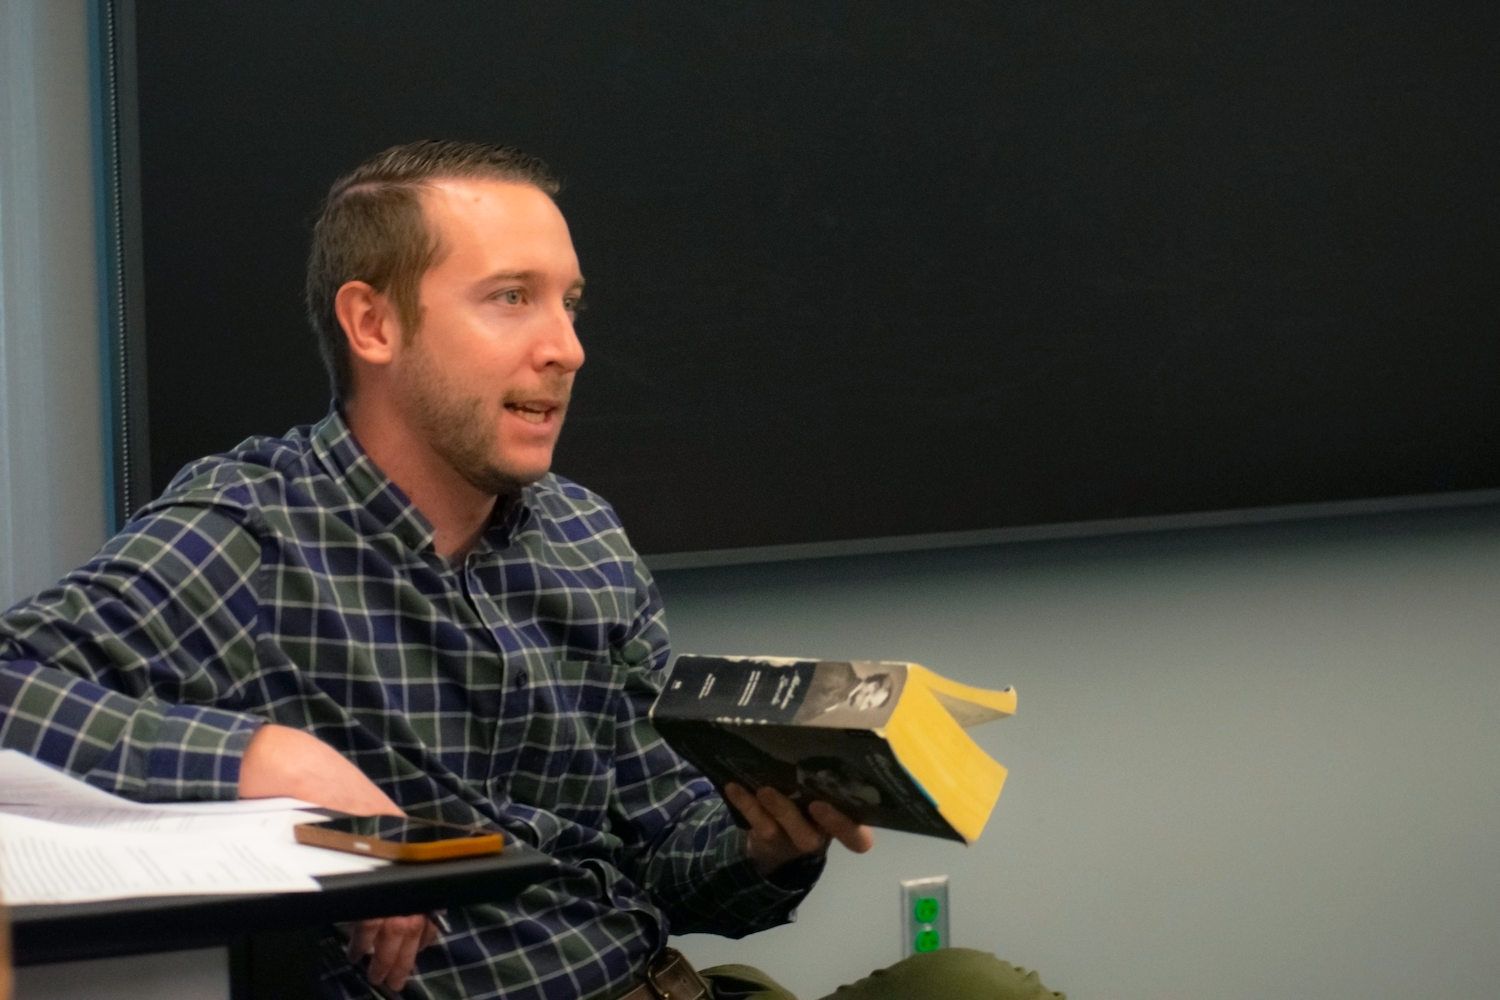 ASU Assistant Professor Zachary German seated at the front of a class, speaking while holding a book.